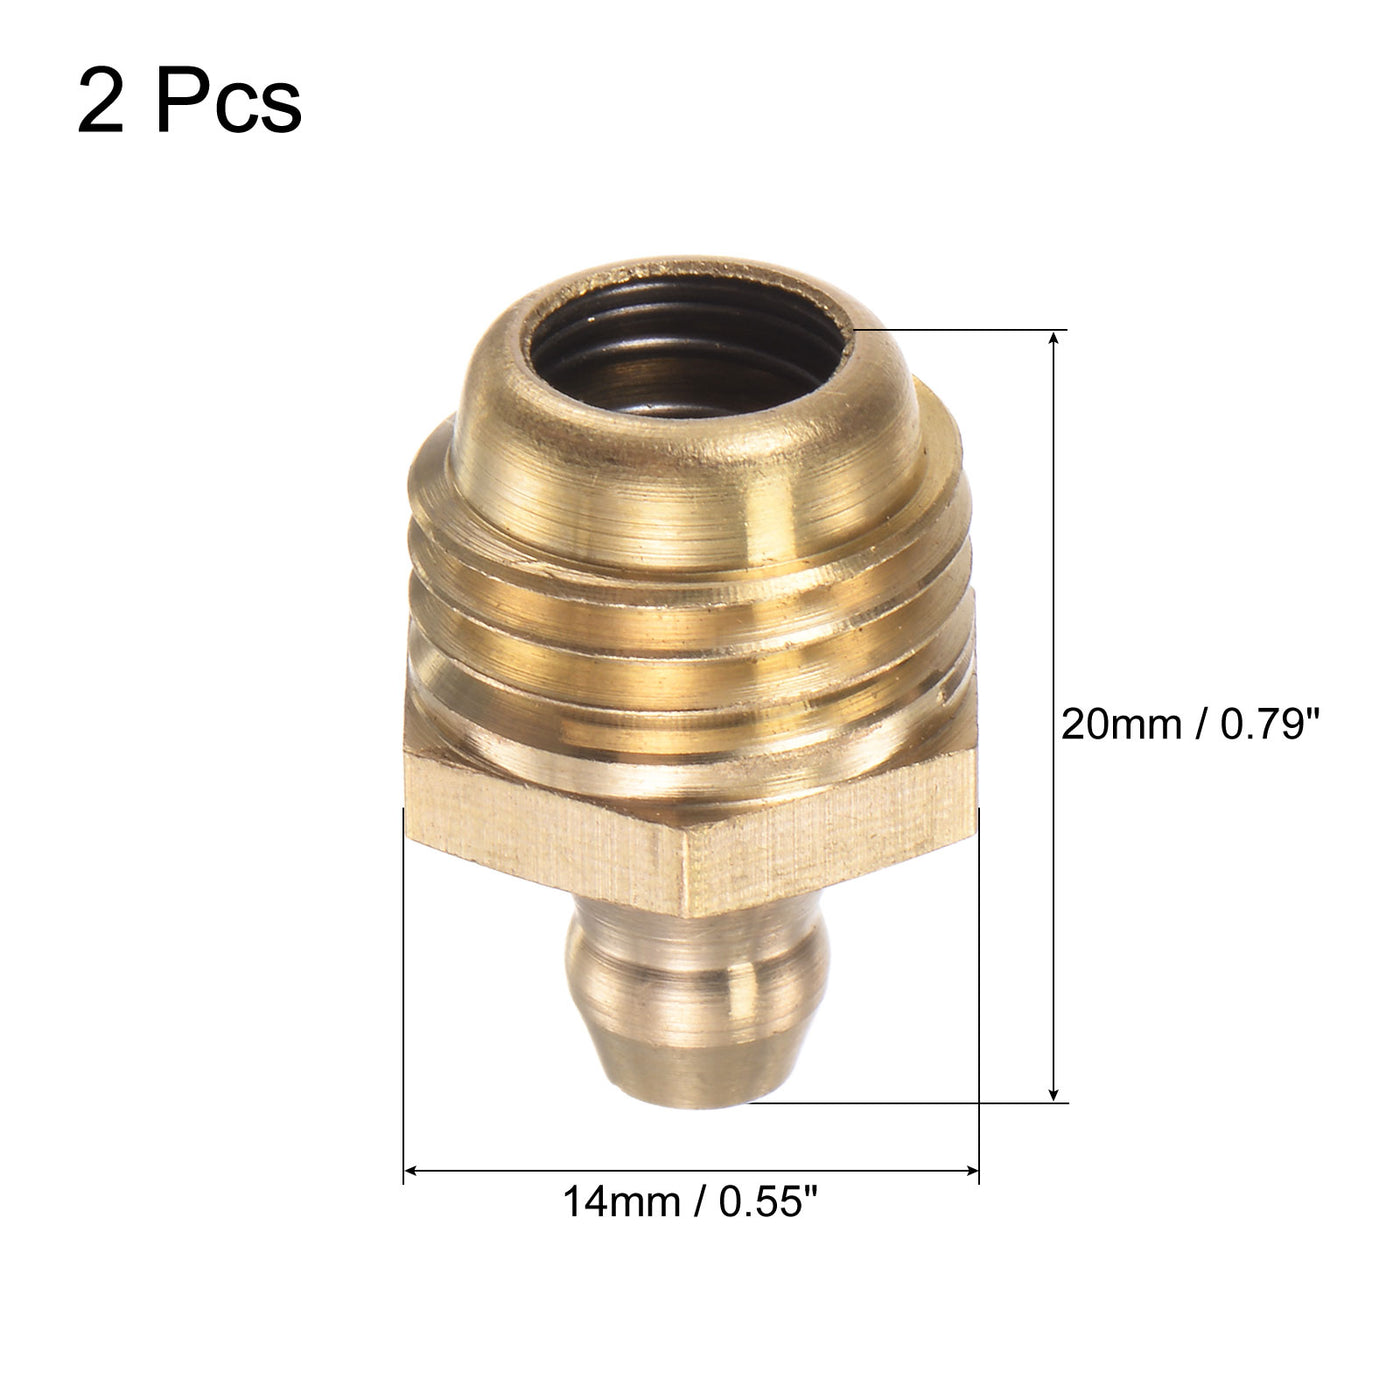 Uxcell Uxcell Brass Straight Hydraulic Grease Fitting Accessories M14 x 1.25mm Thread, 2Pcs